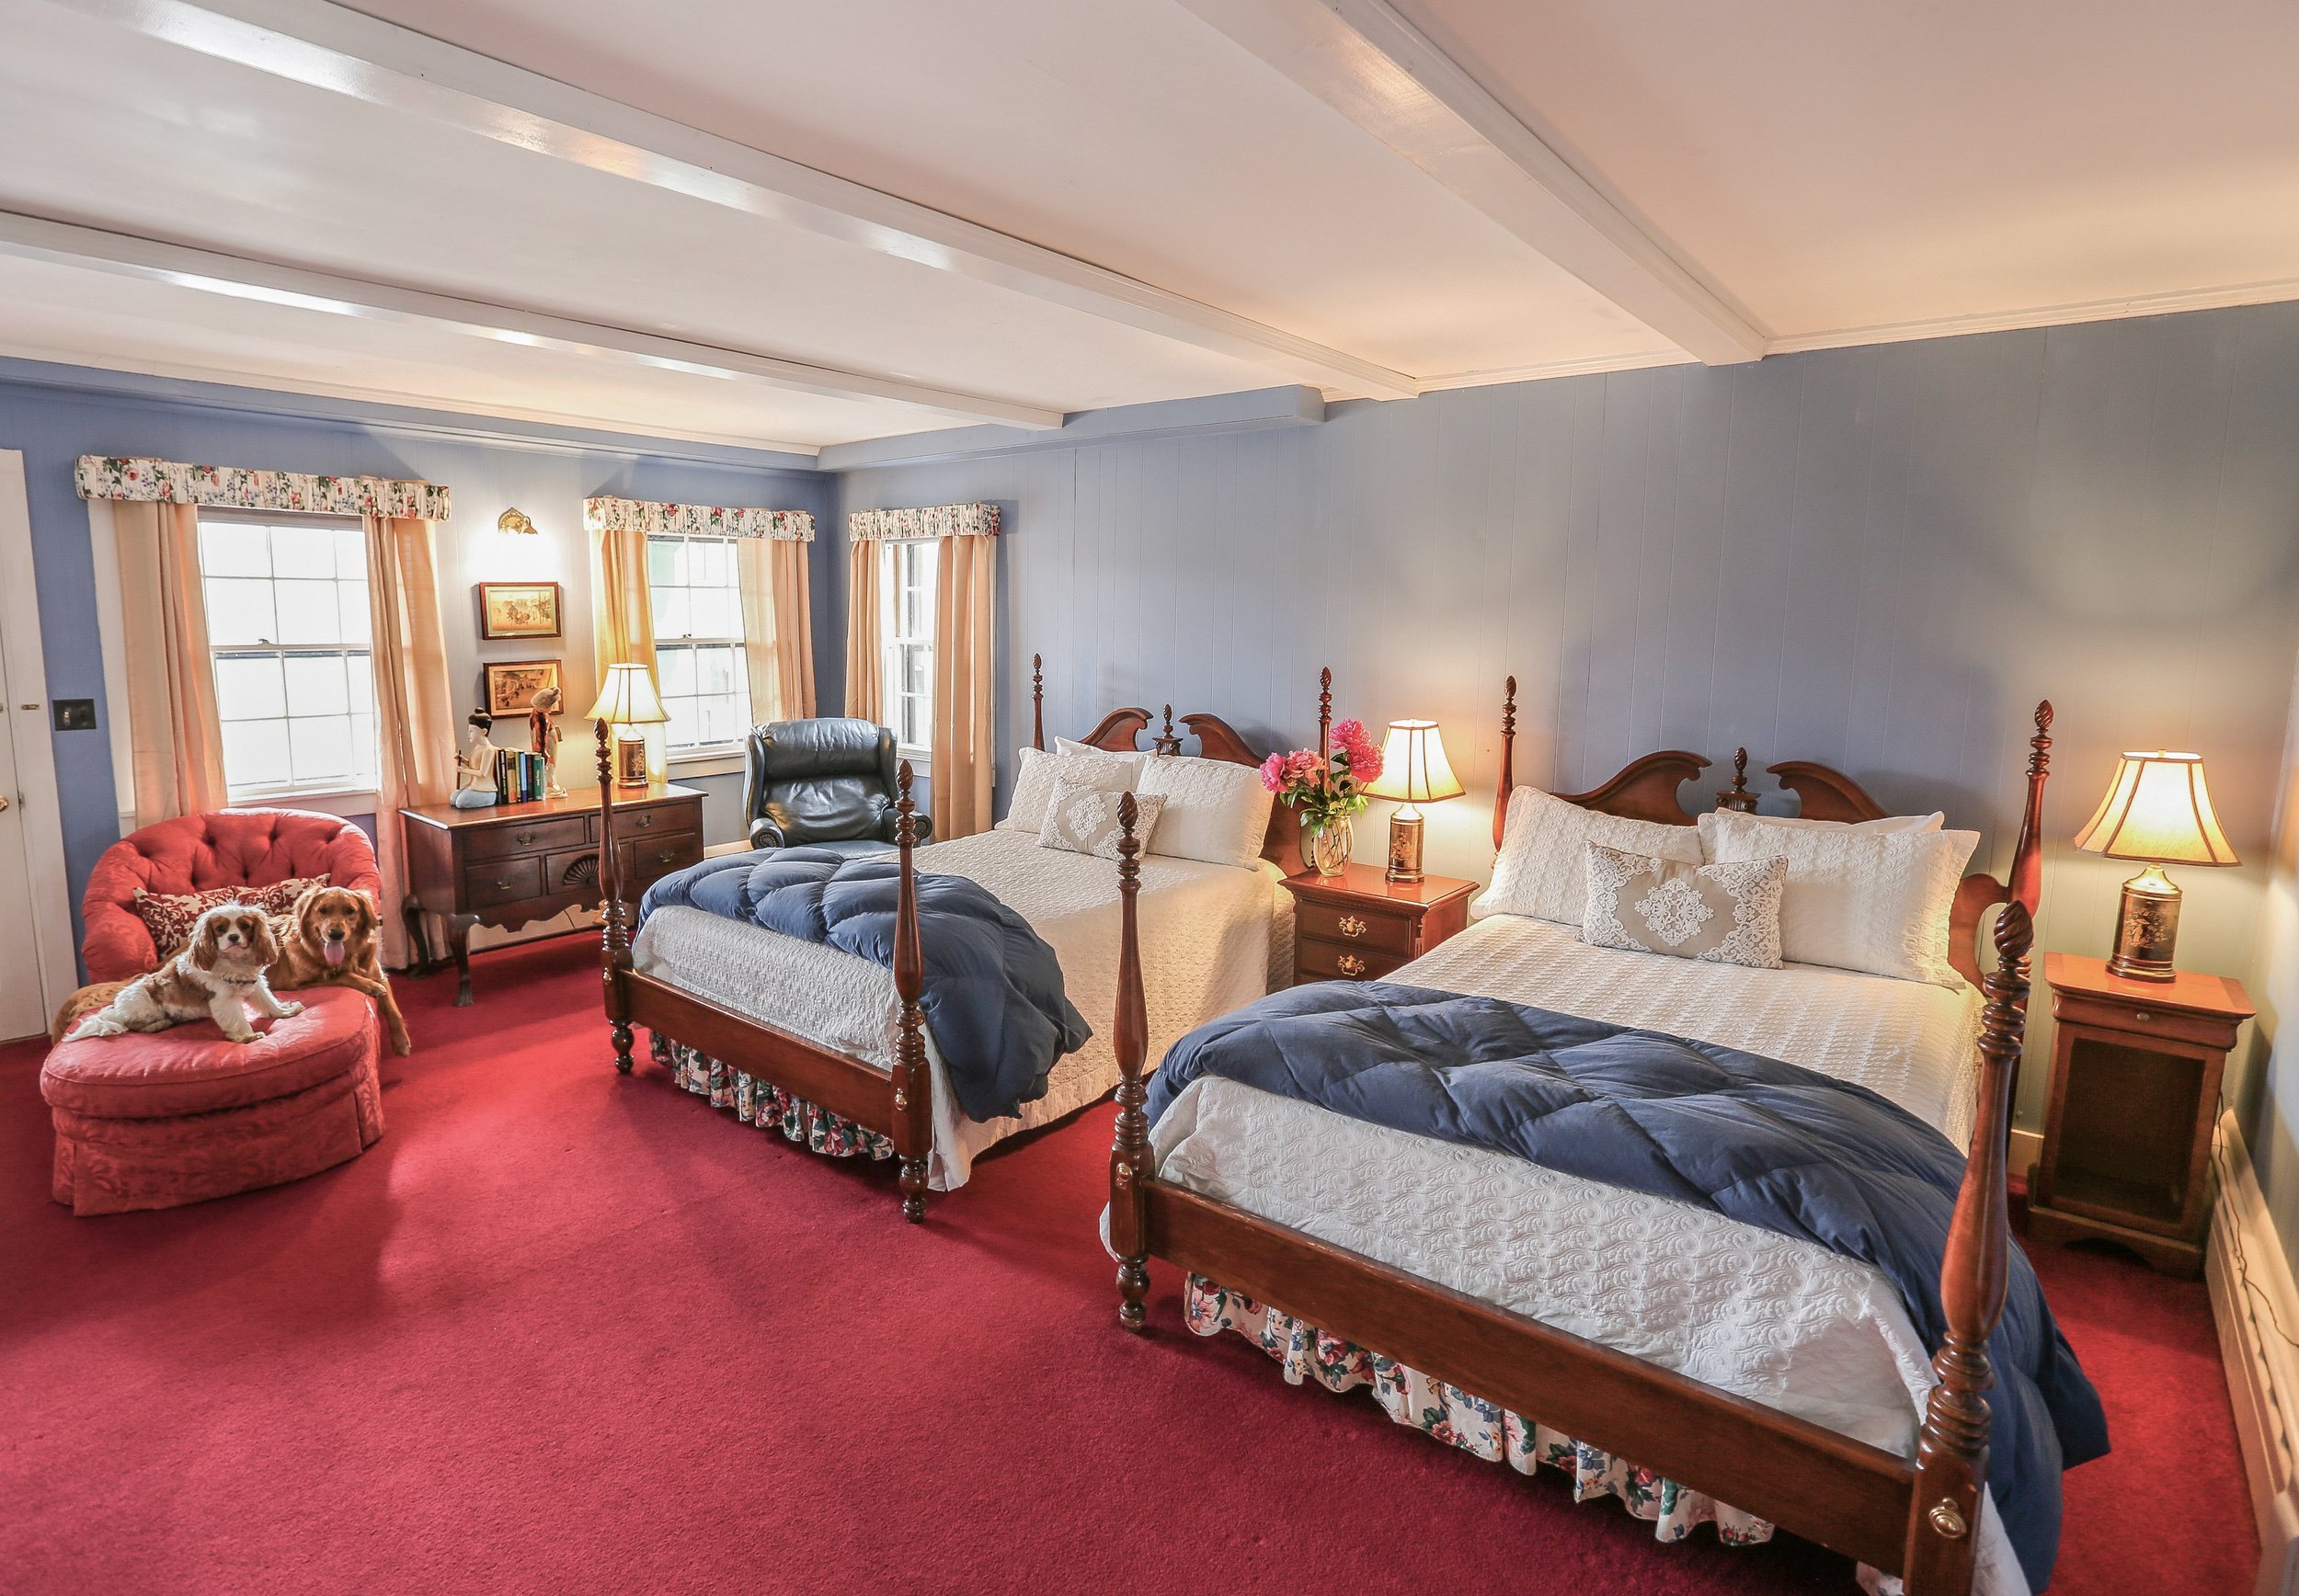 34 Dog friendly guest rooms at The WIlburton.jpeg